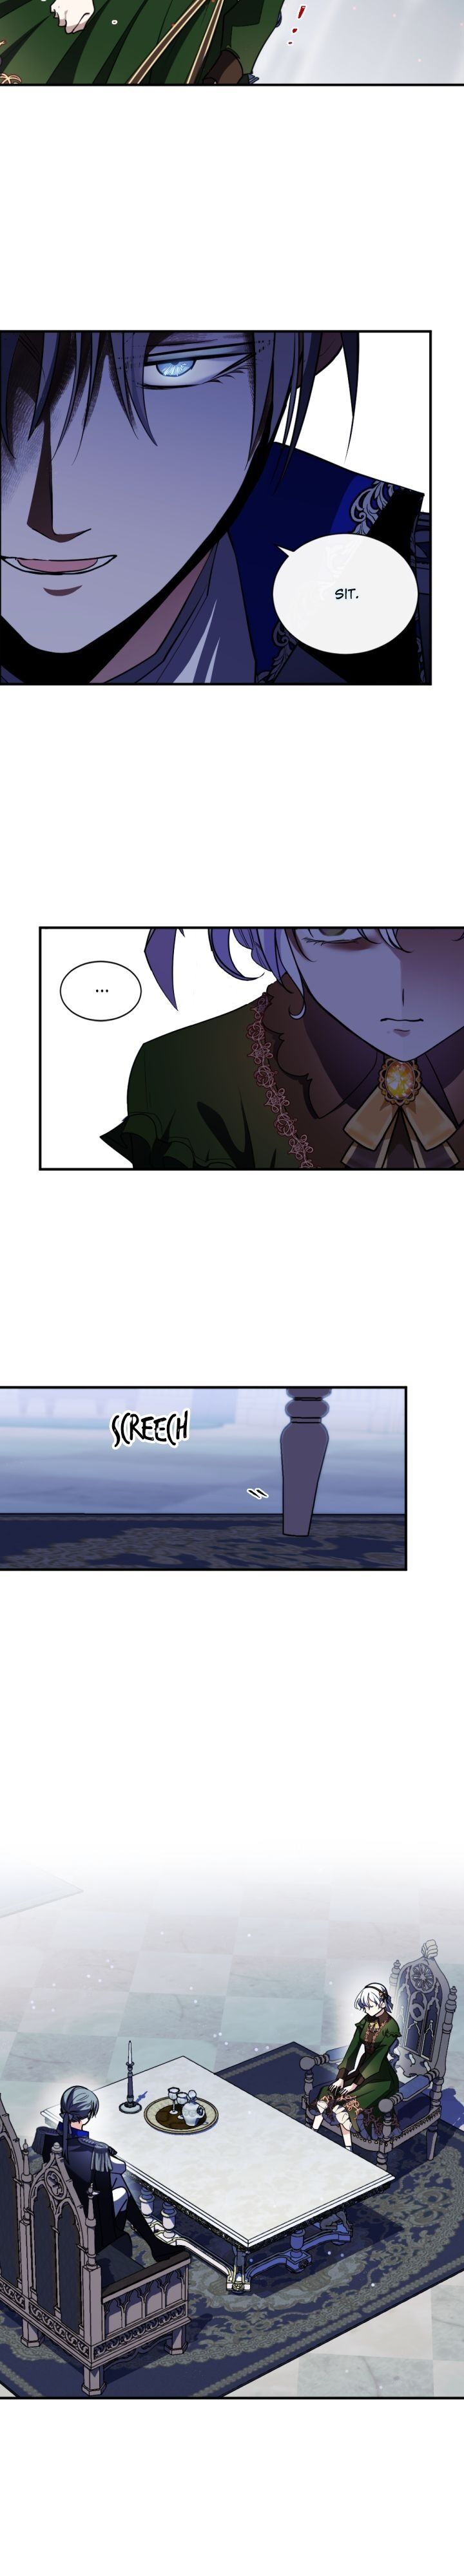 A Witch's Hopeless Wish - Page 3